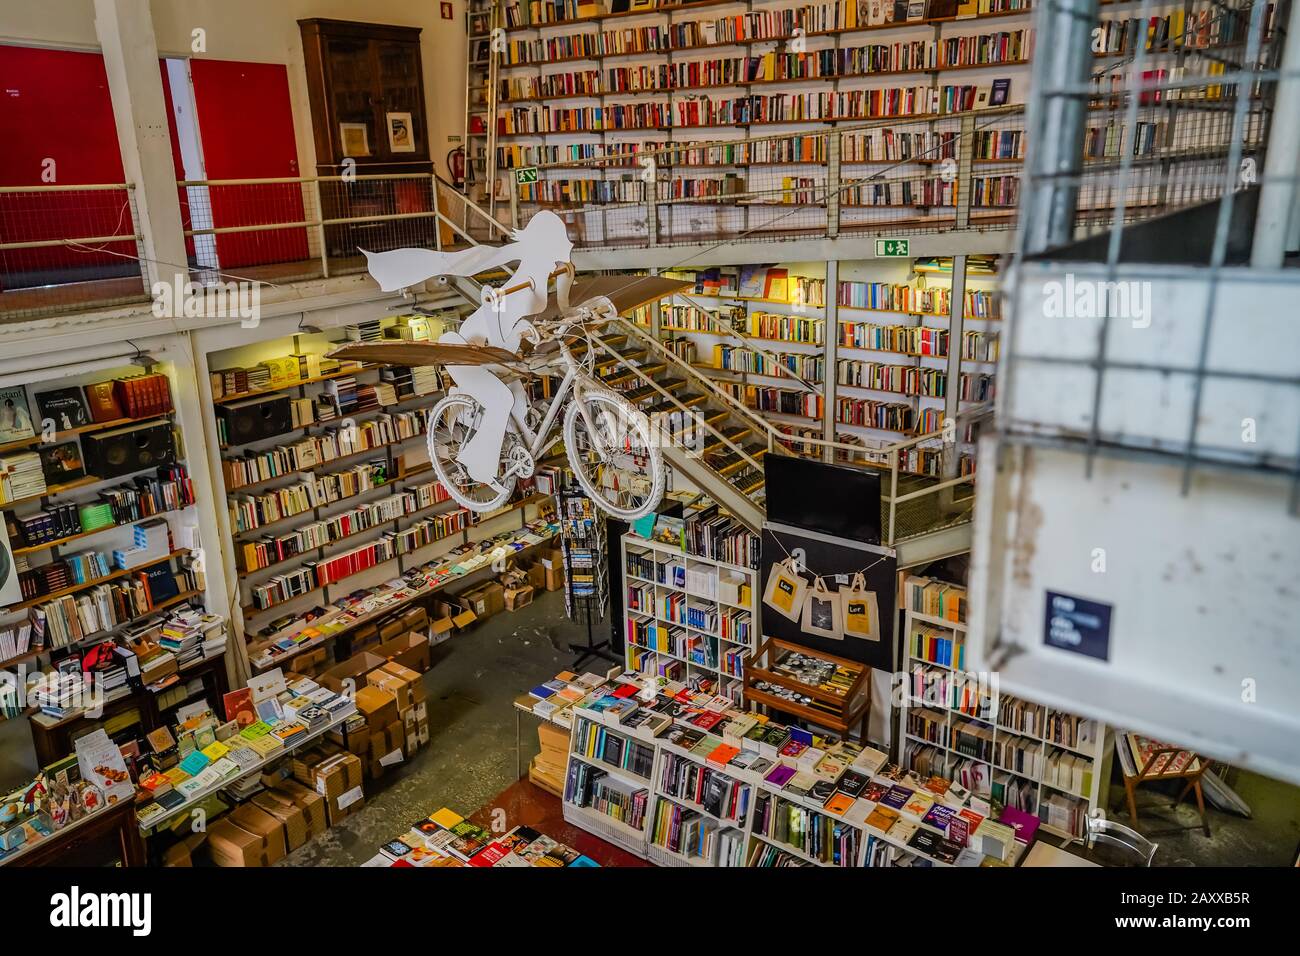 Ler Devagar is a former newspaper print workshop, now converted to a bookstore in LX factory in Lisbon Portugal. Its motto means read slowly. Stock Photo